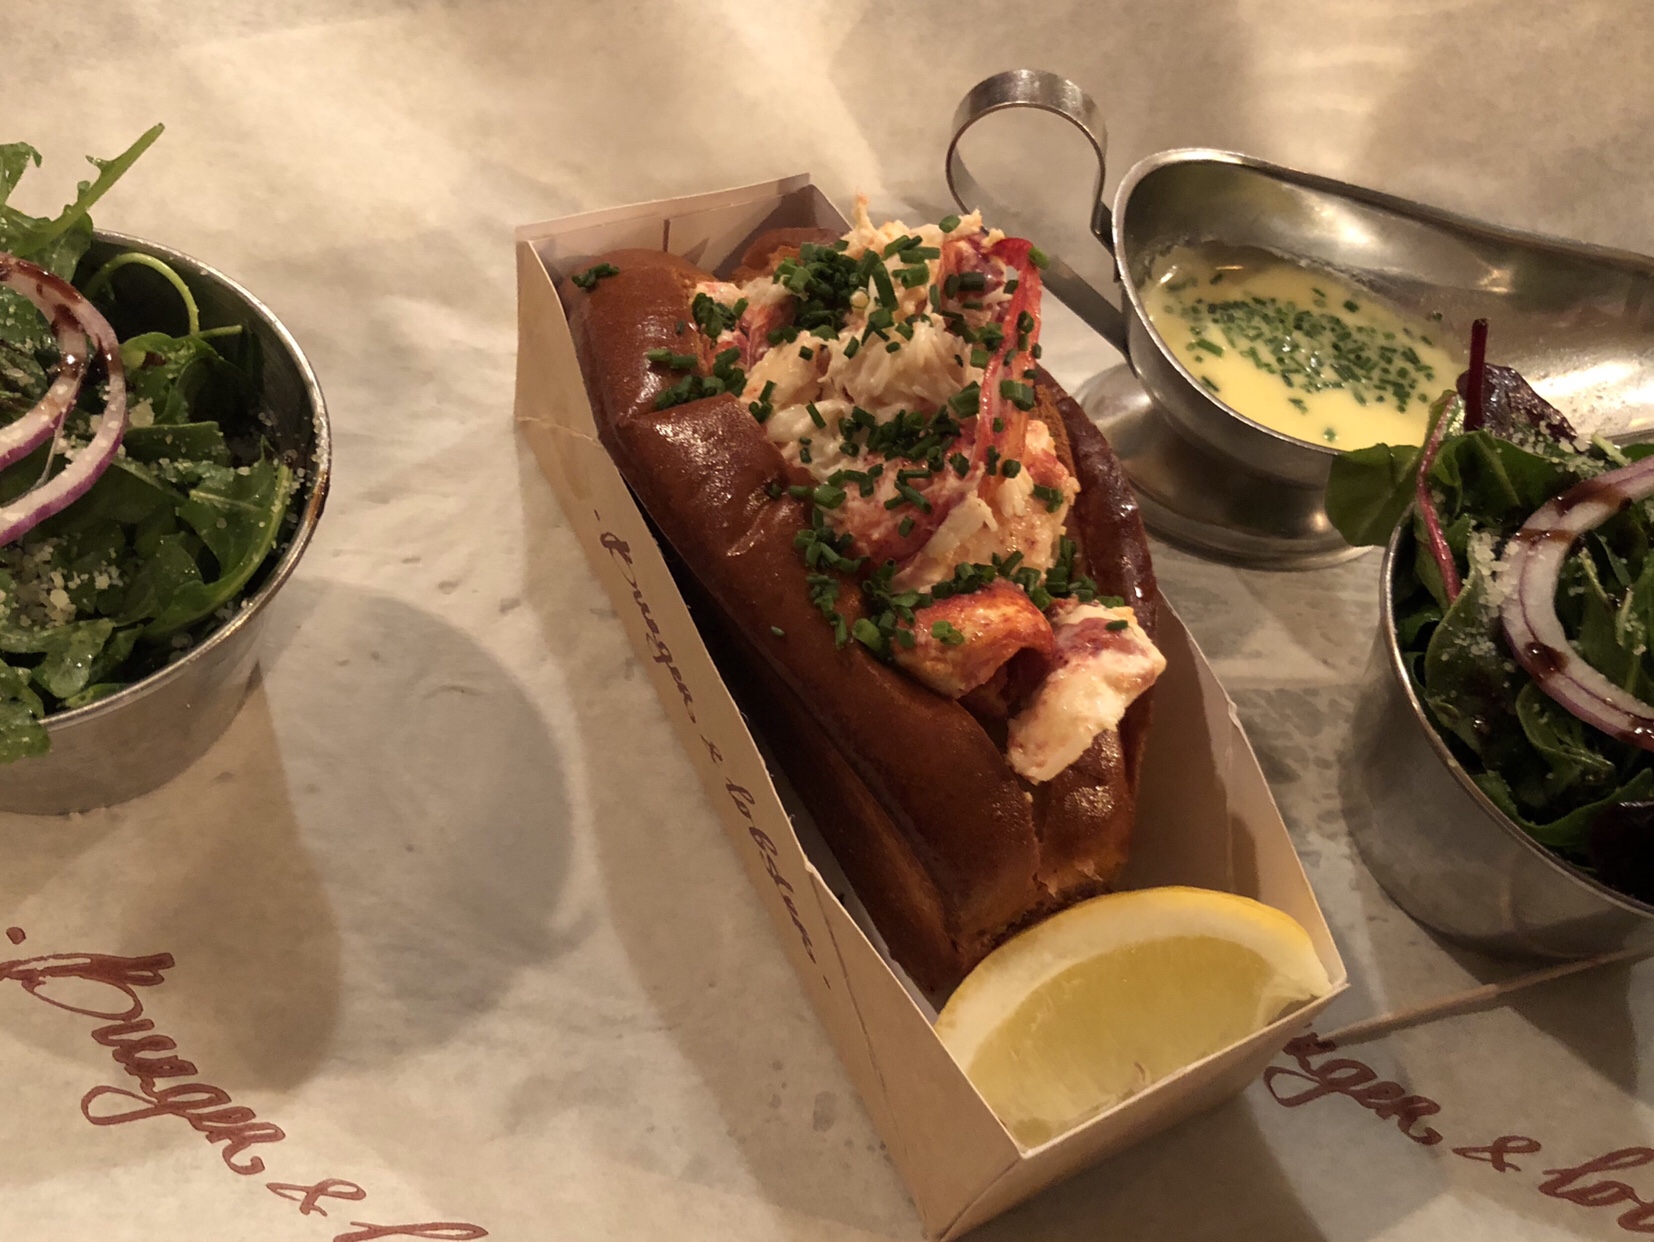 Sometime’s it’s all about the Lobster Roll!